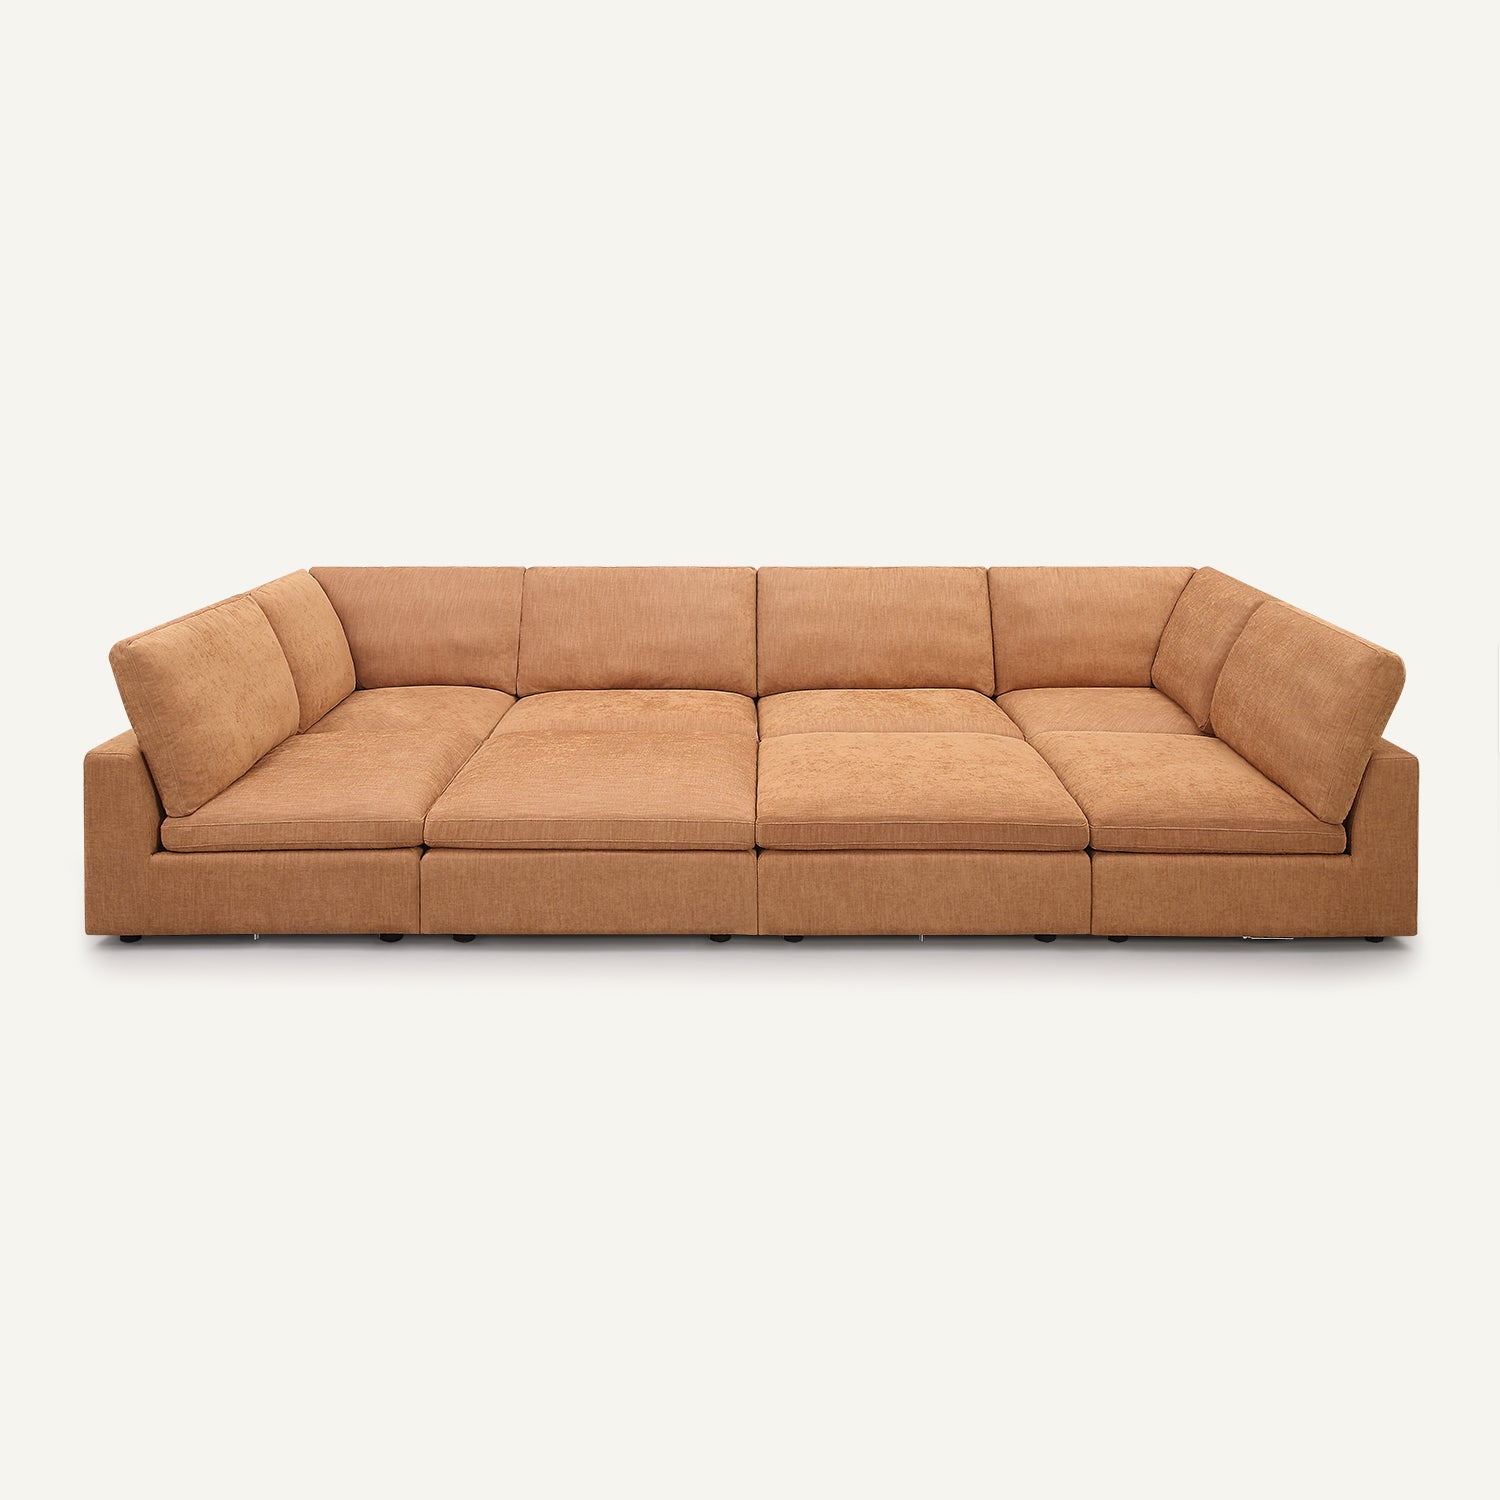 Cloud Tan Linen 6-seat Sofa with Double Ottomans